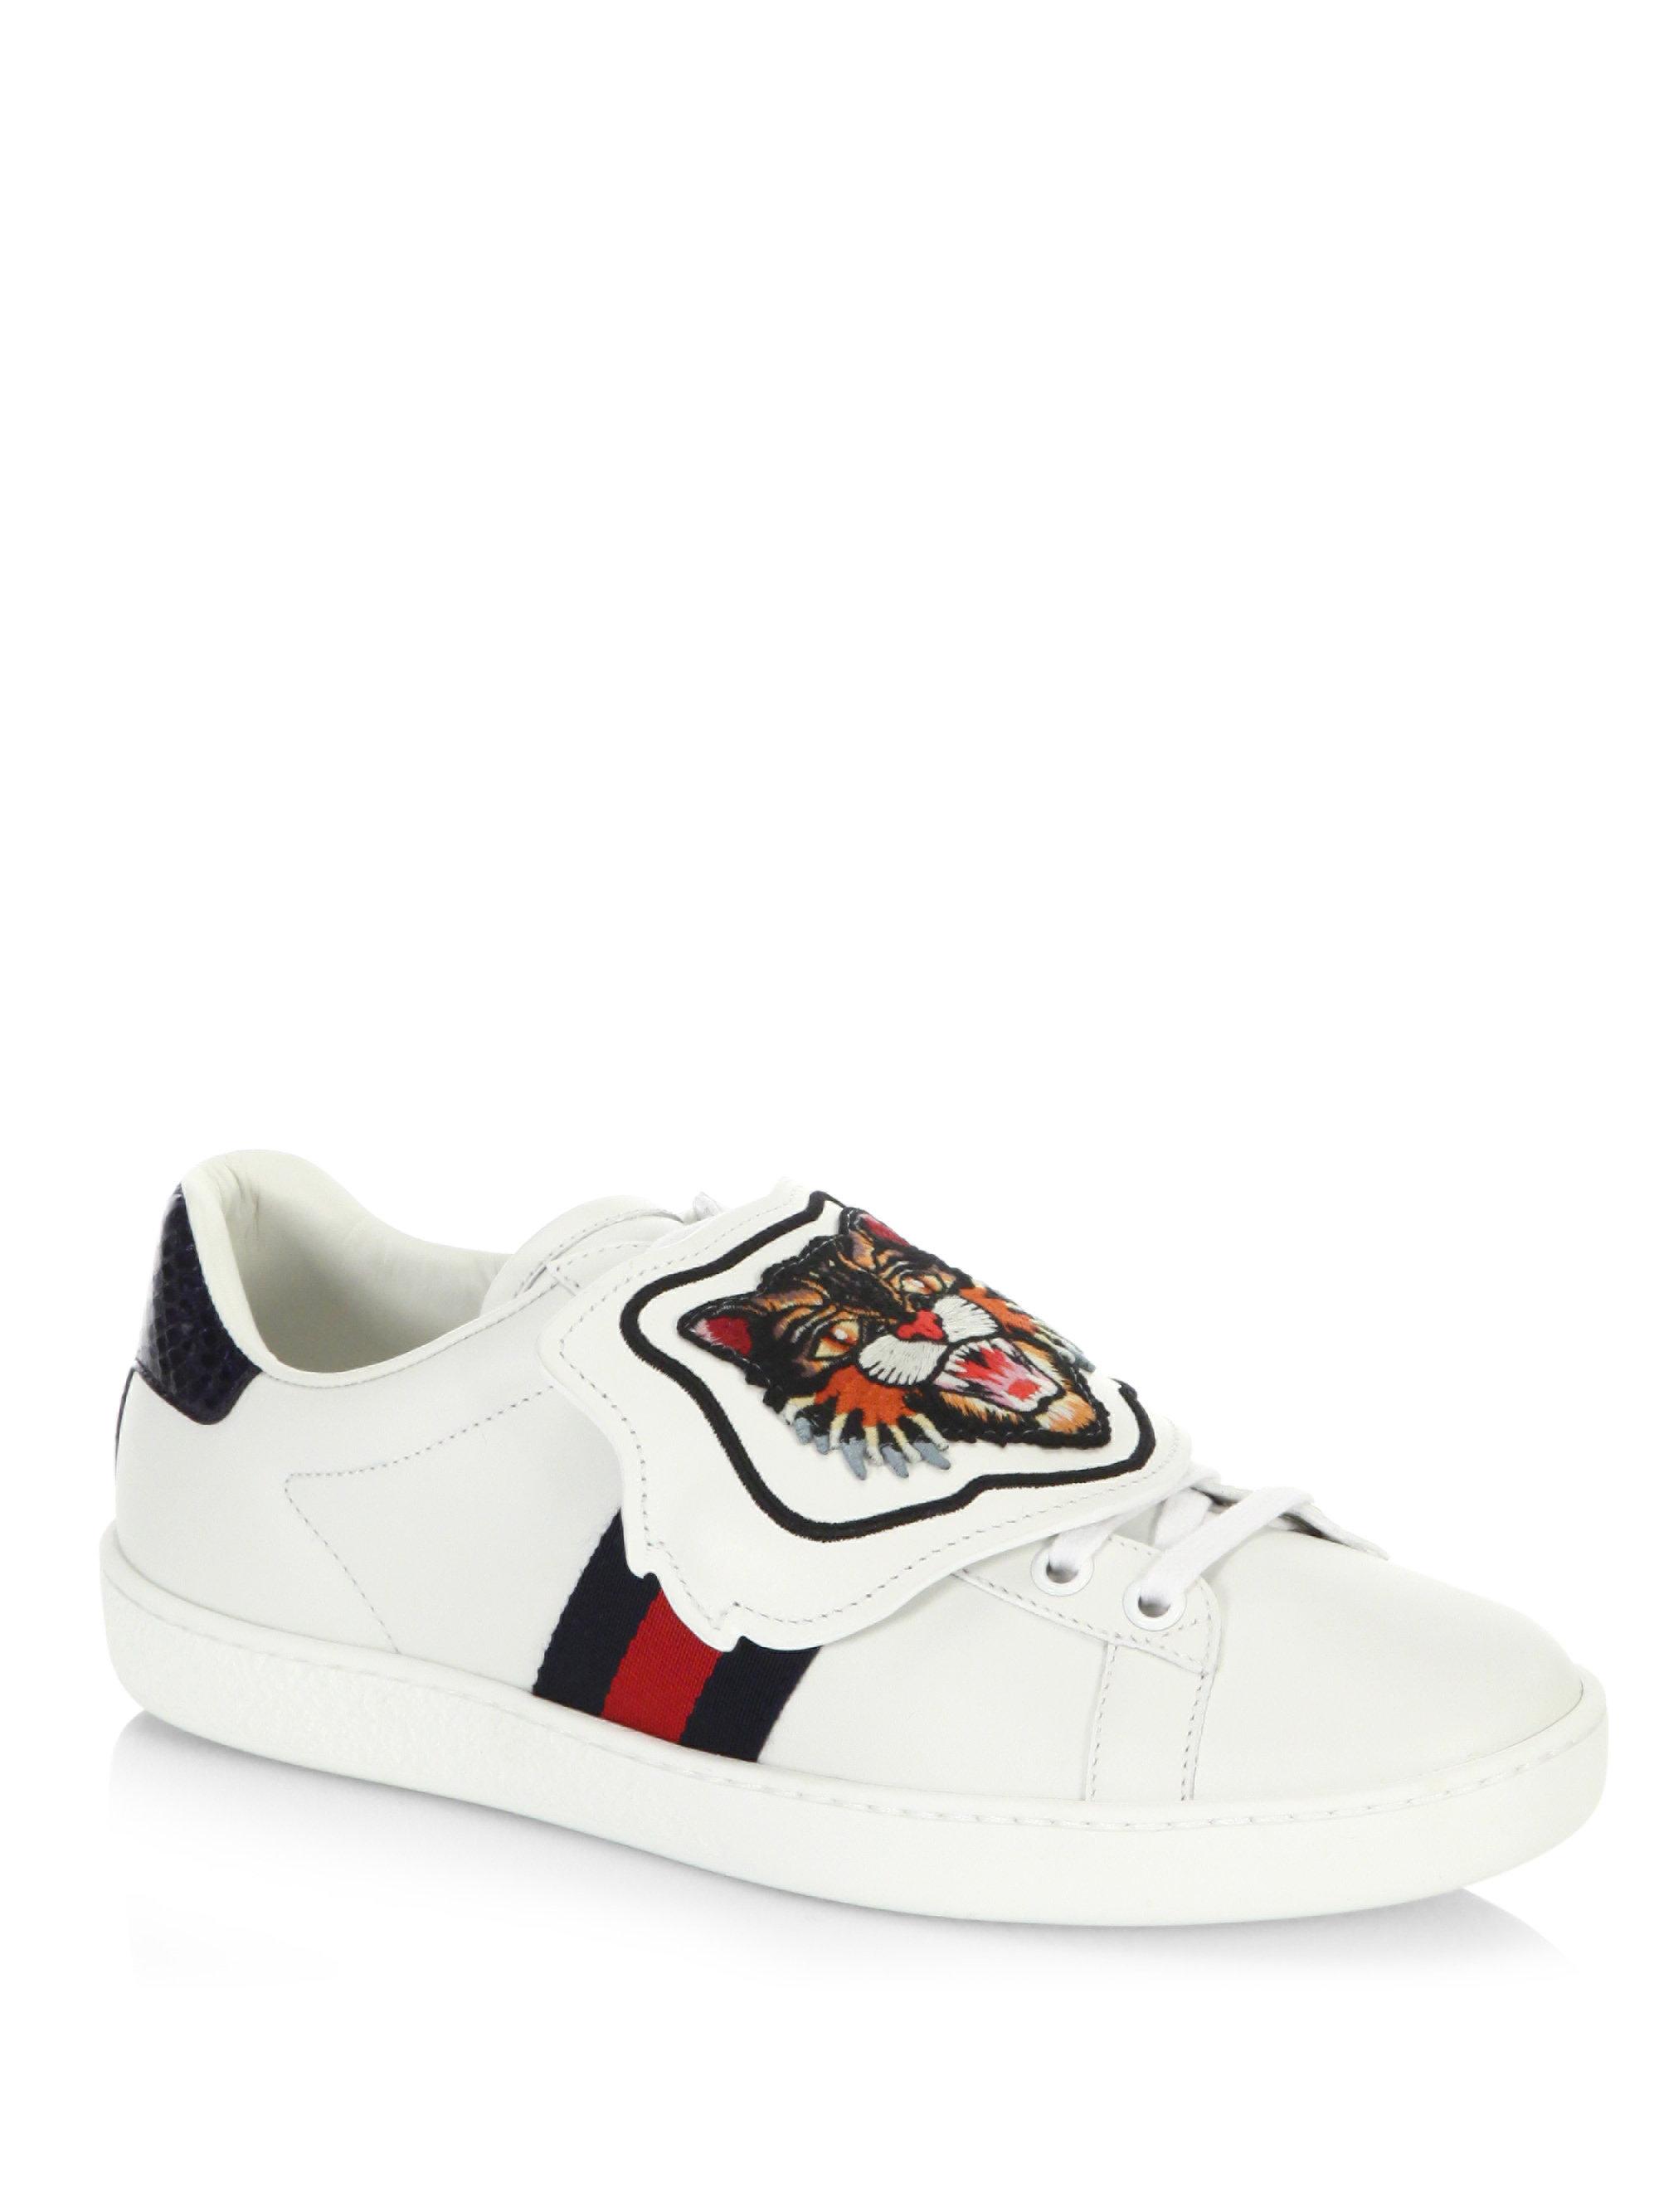 gucci ace sneakers lion